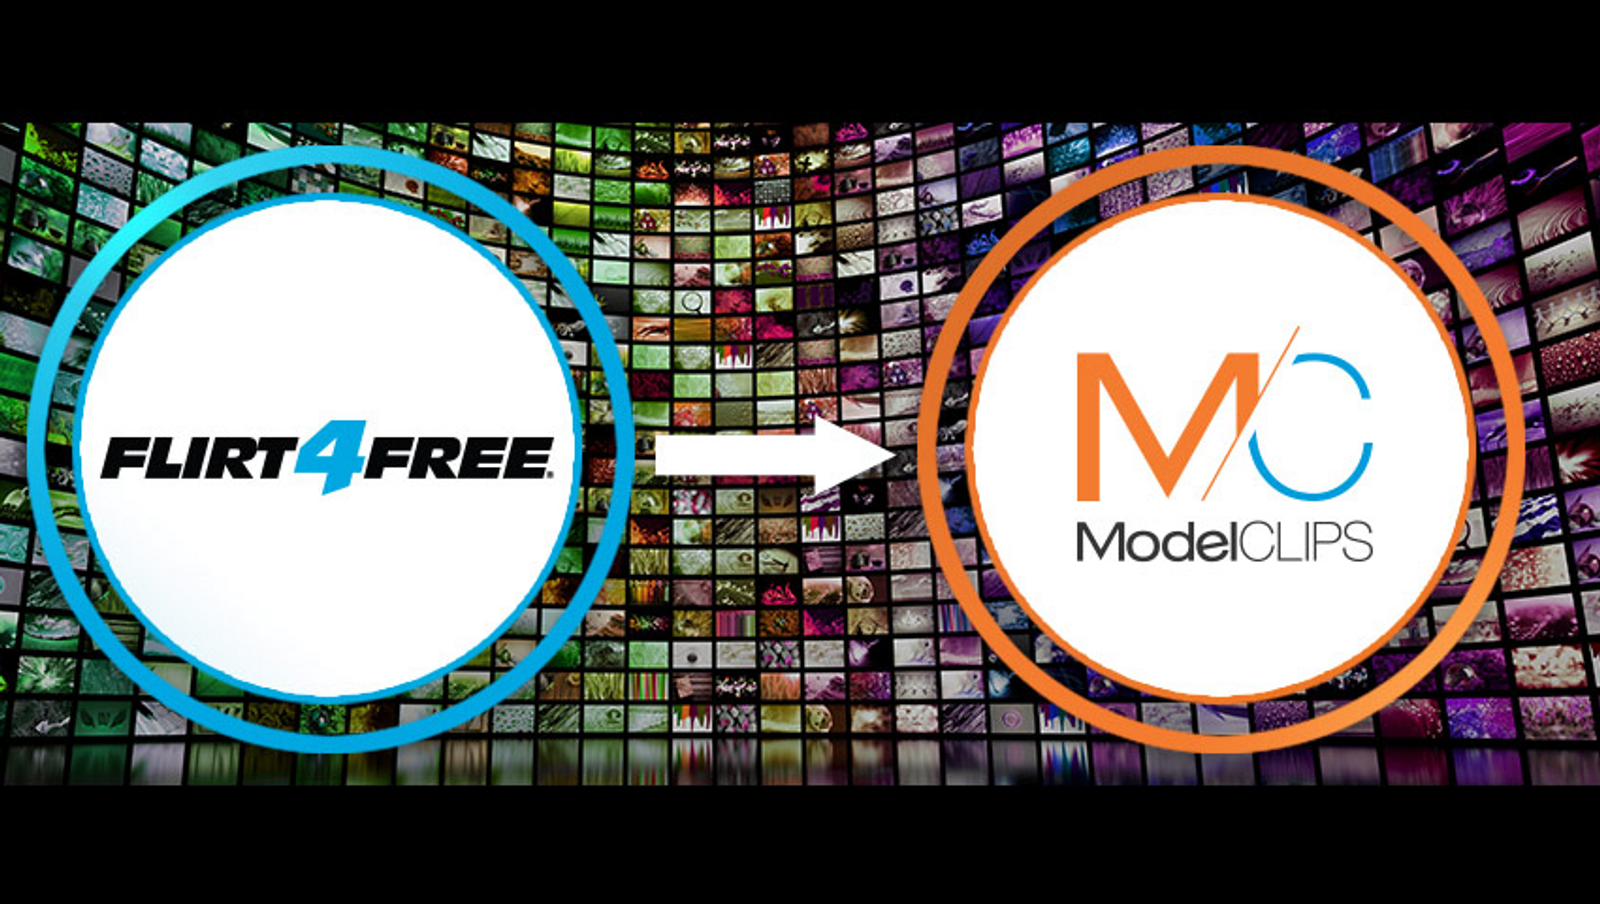 ModelClips to Feature Content From Flirt4Free Cam Stars